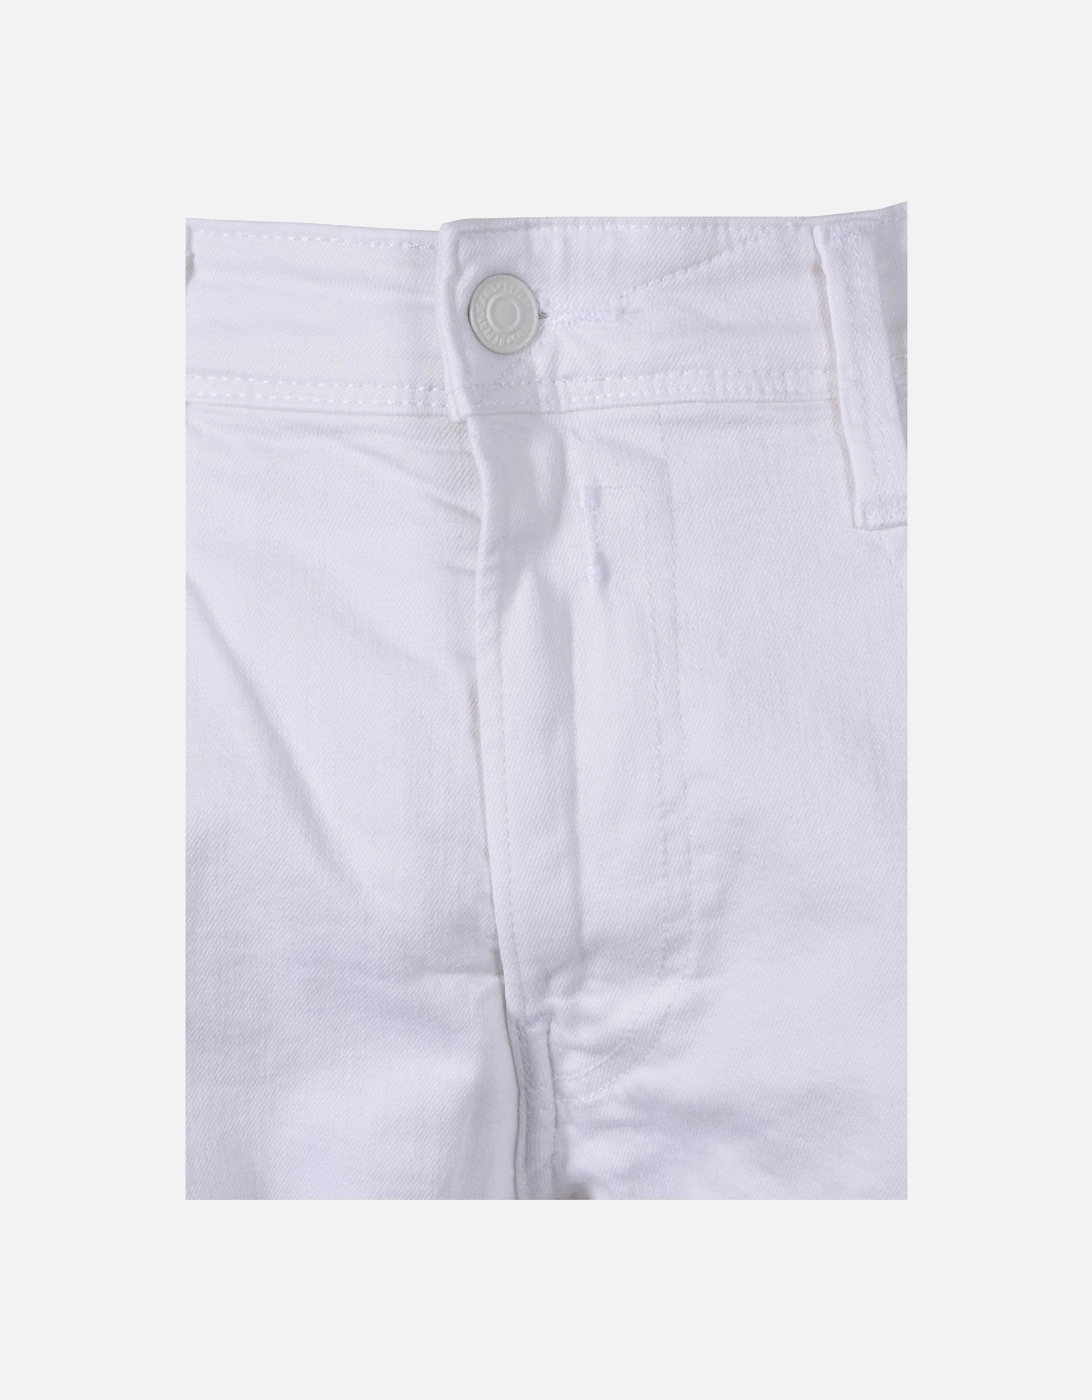 Anbass Slim Fit Jeans White